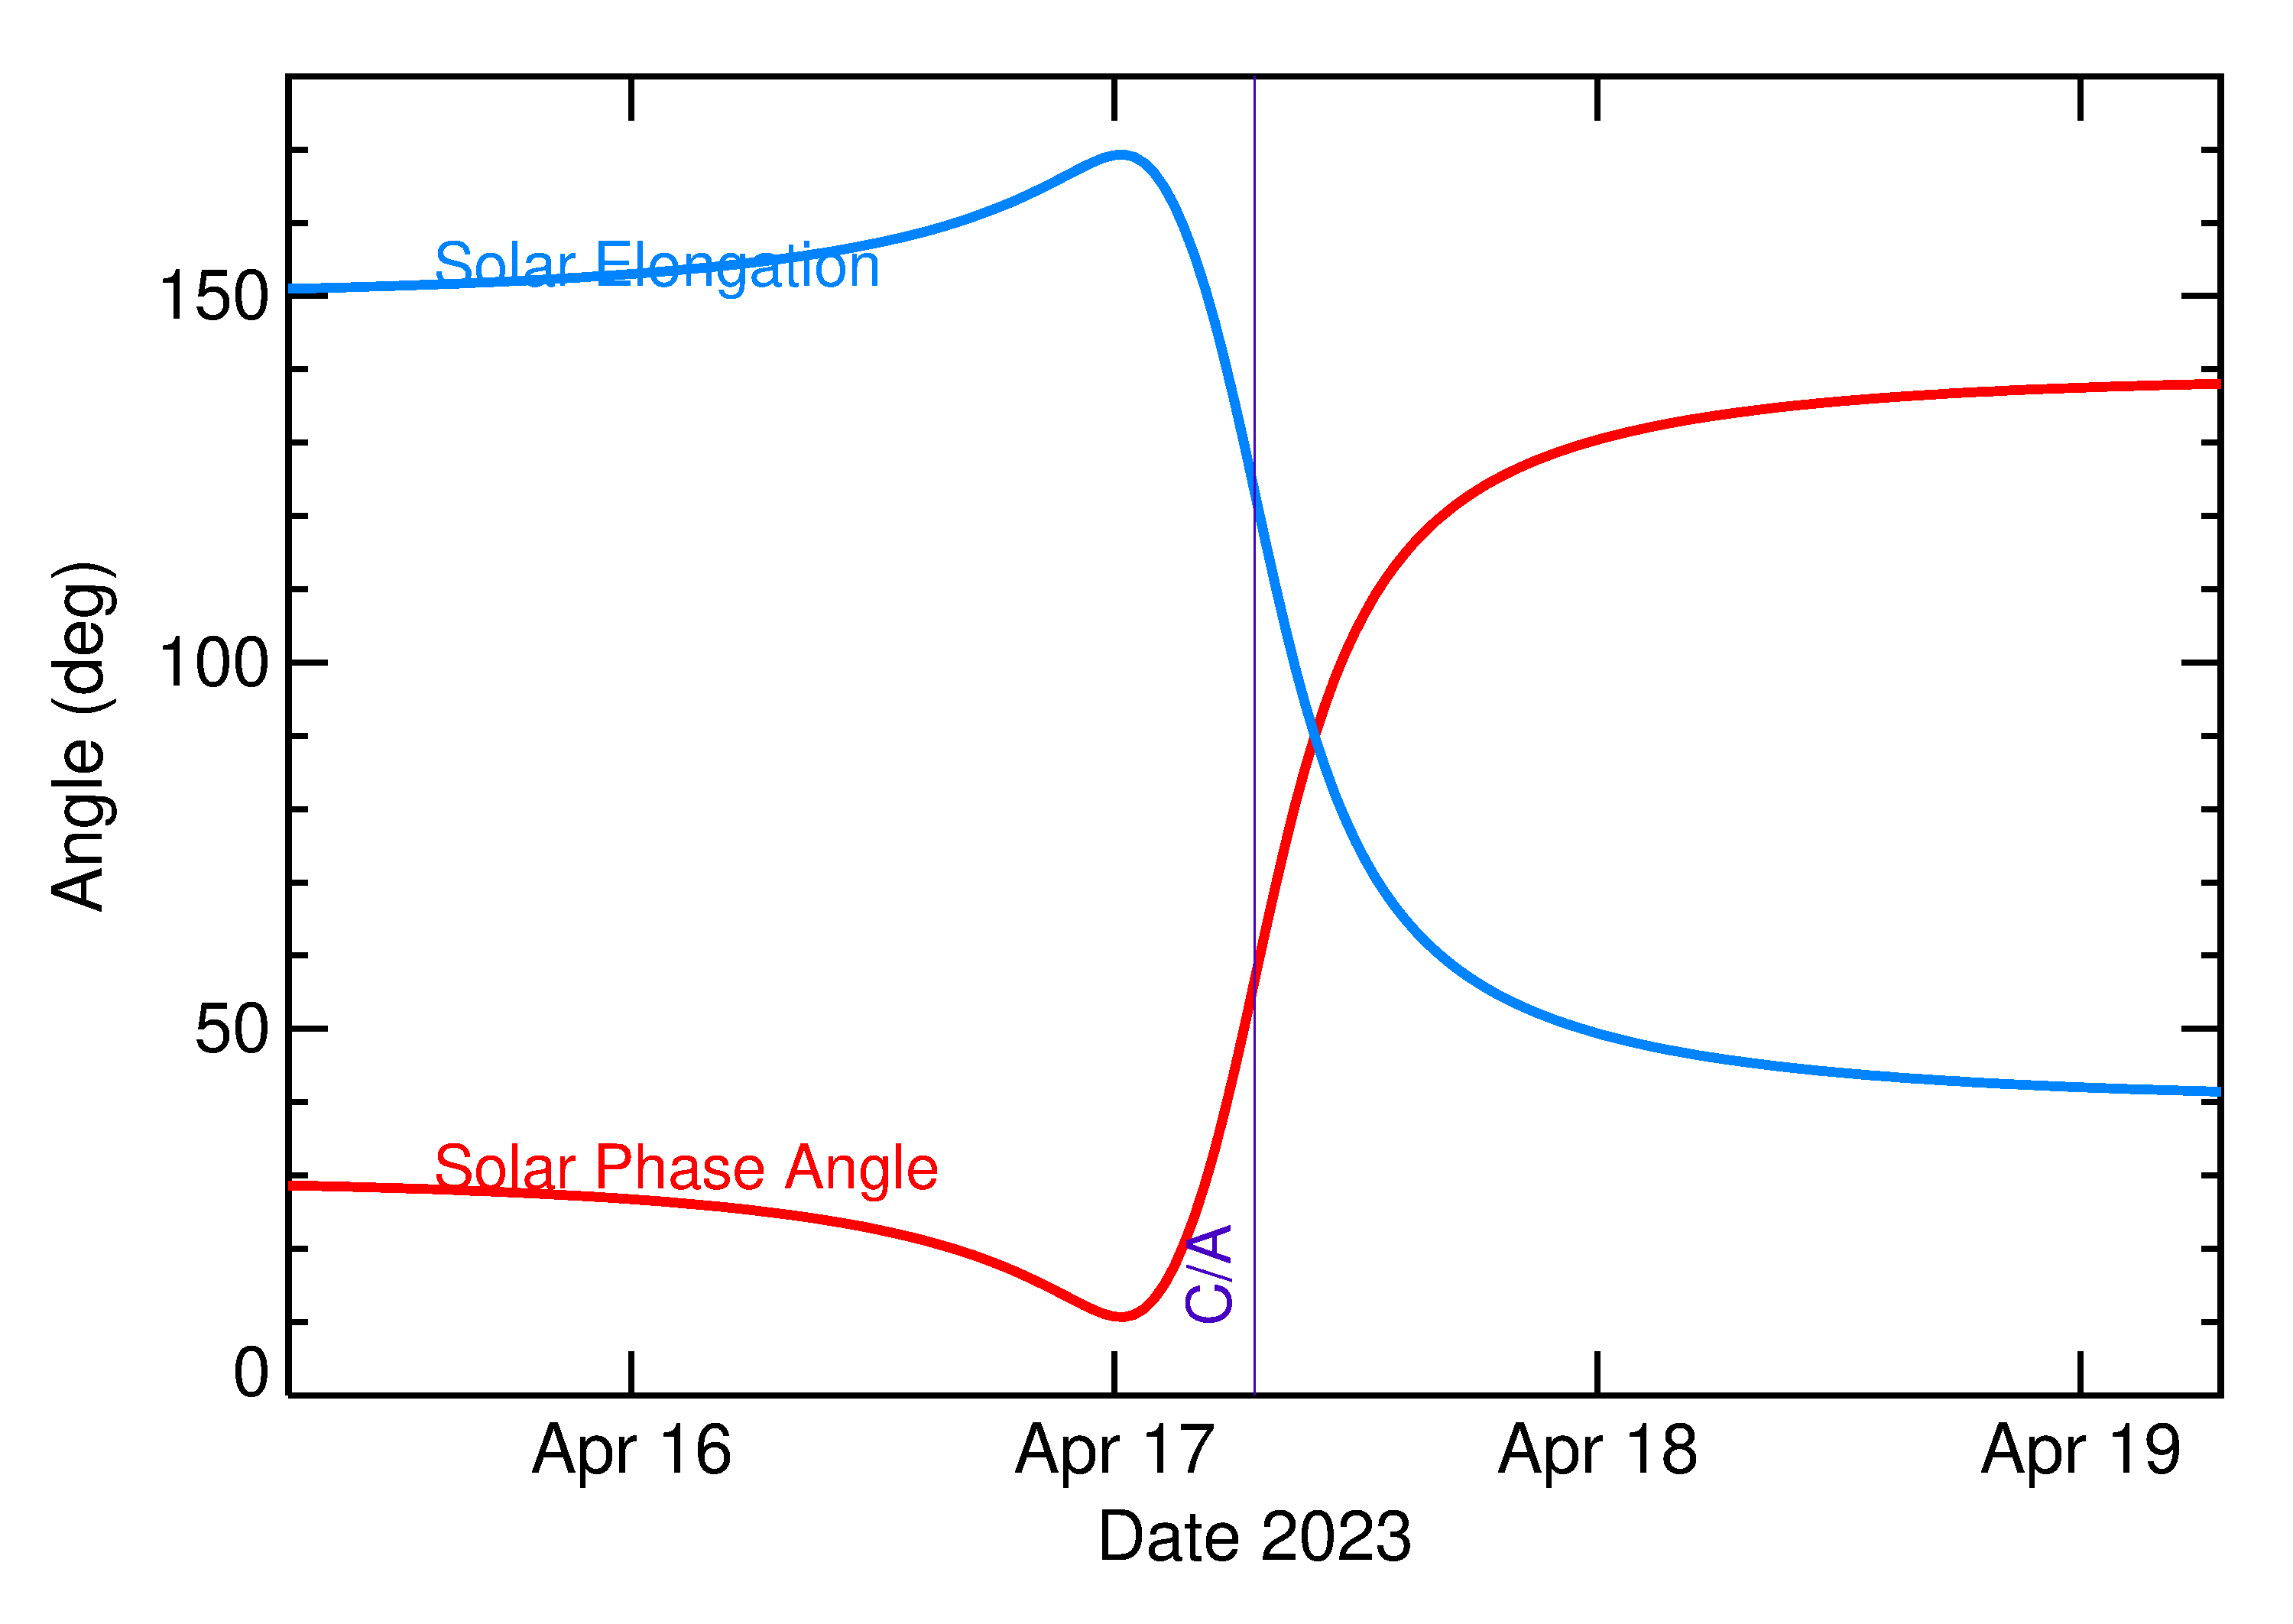 Solar Elongation and Solar Phase Angle of 2023 HB in the days around closest approach